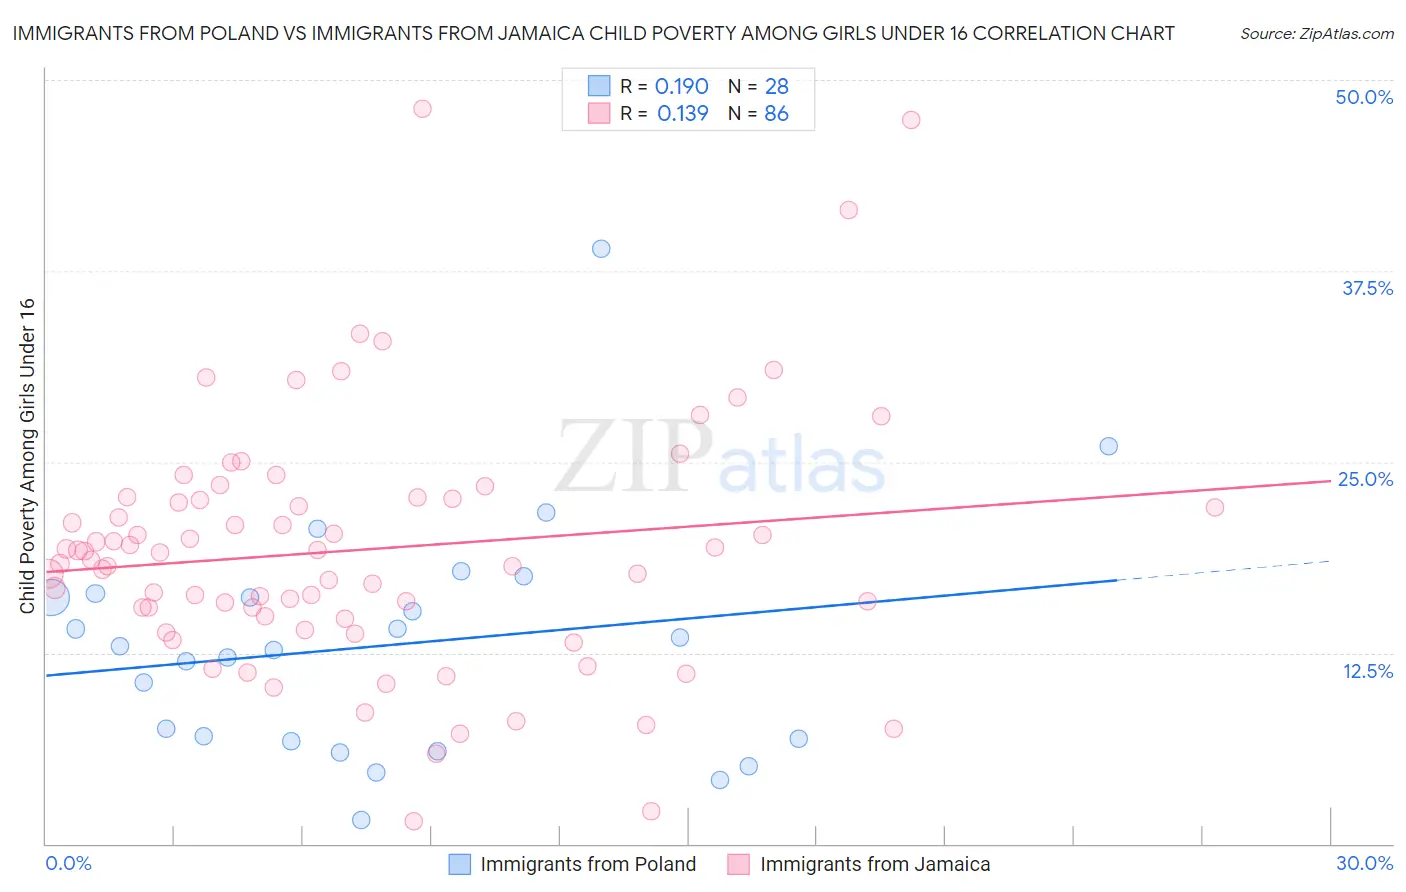 Immigrants from Poland vs Immigrants from Jamaica Child Poverty Among Girls Under 16